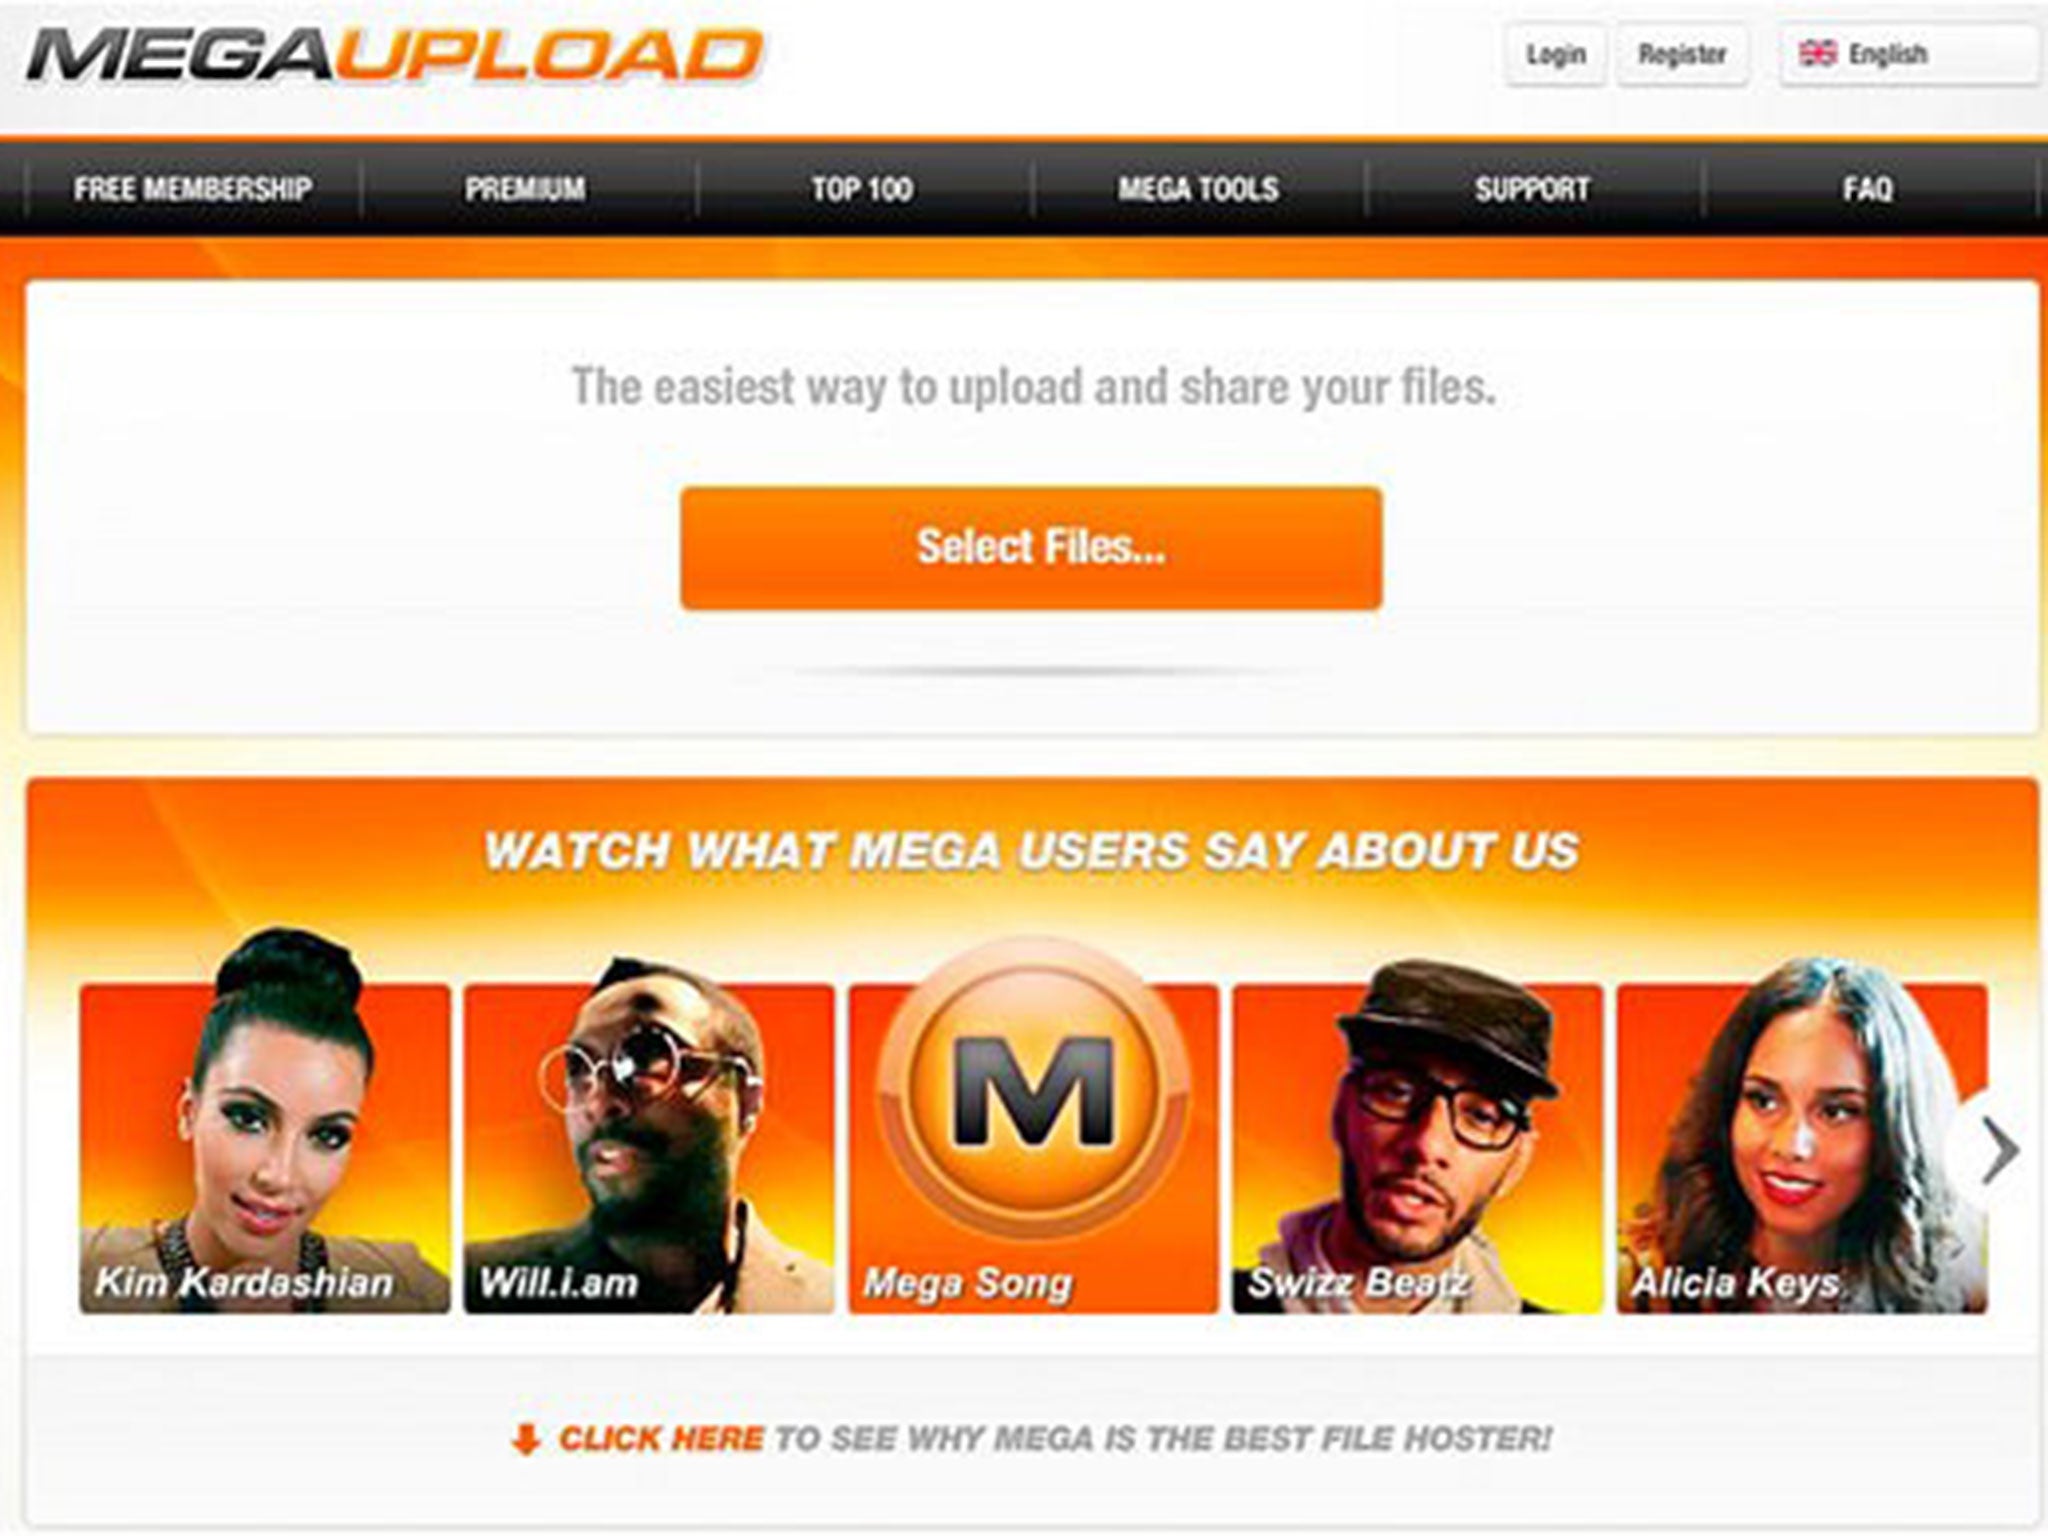 The Megaupload file-sharing site was shut down in 2012 after a police raid